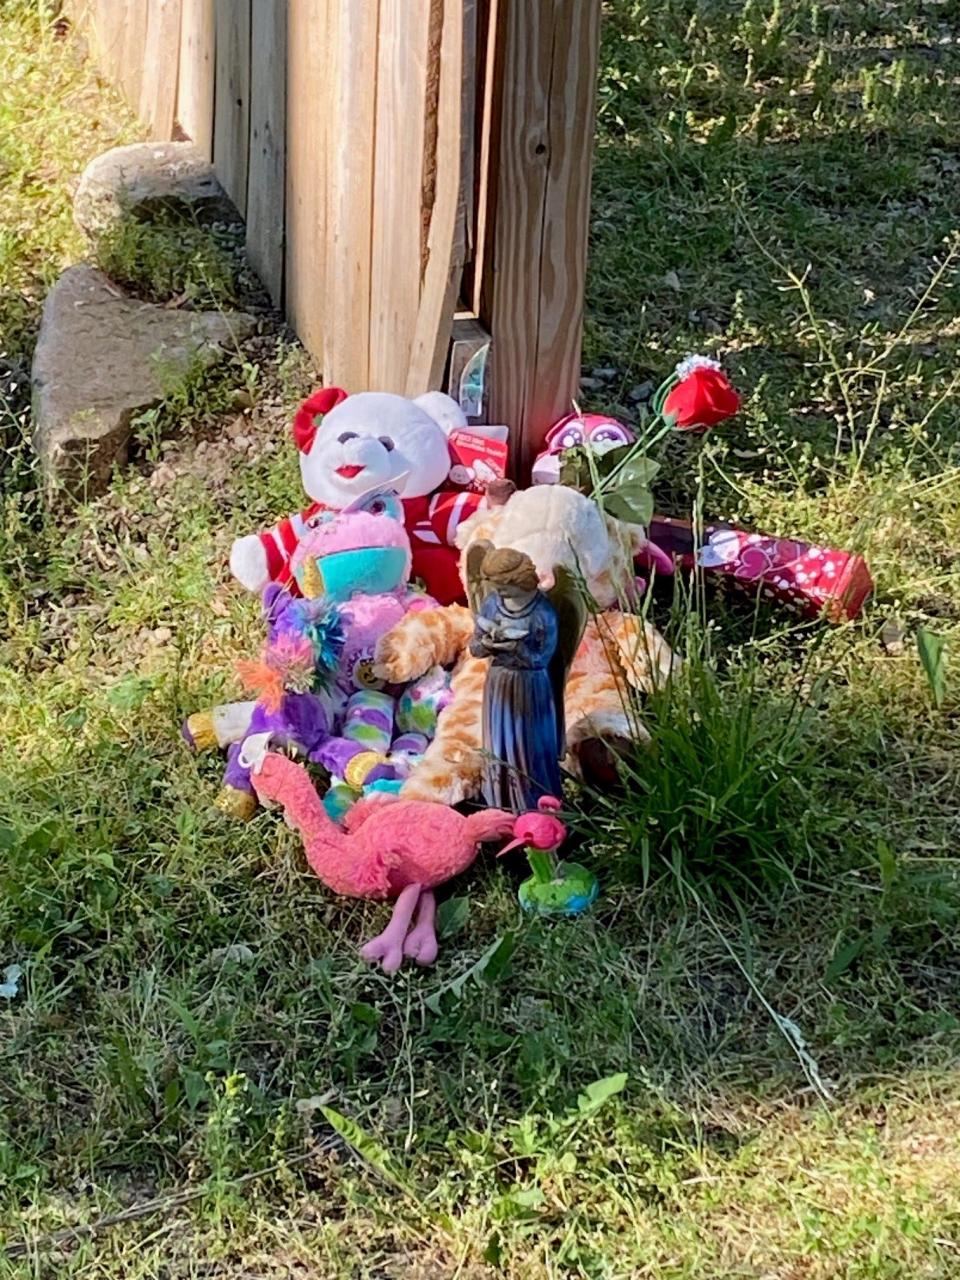 A memorial is set up outside the home in the 1700 block of East Yale Avenue where three people — a 24-year-old man, a 3-year-old boy and a 21-month-old girl — were found dead Sunday. Firefighters found high levels of carbon monoxide in the house.